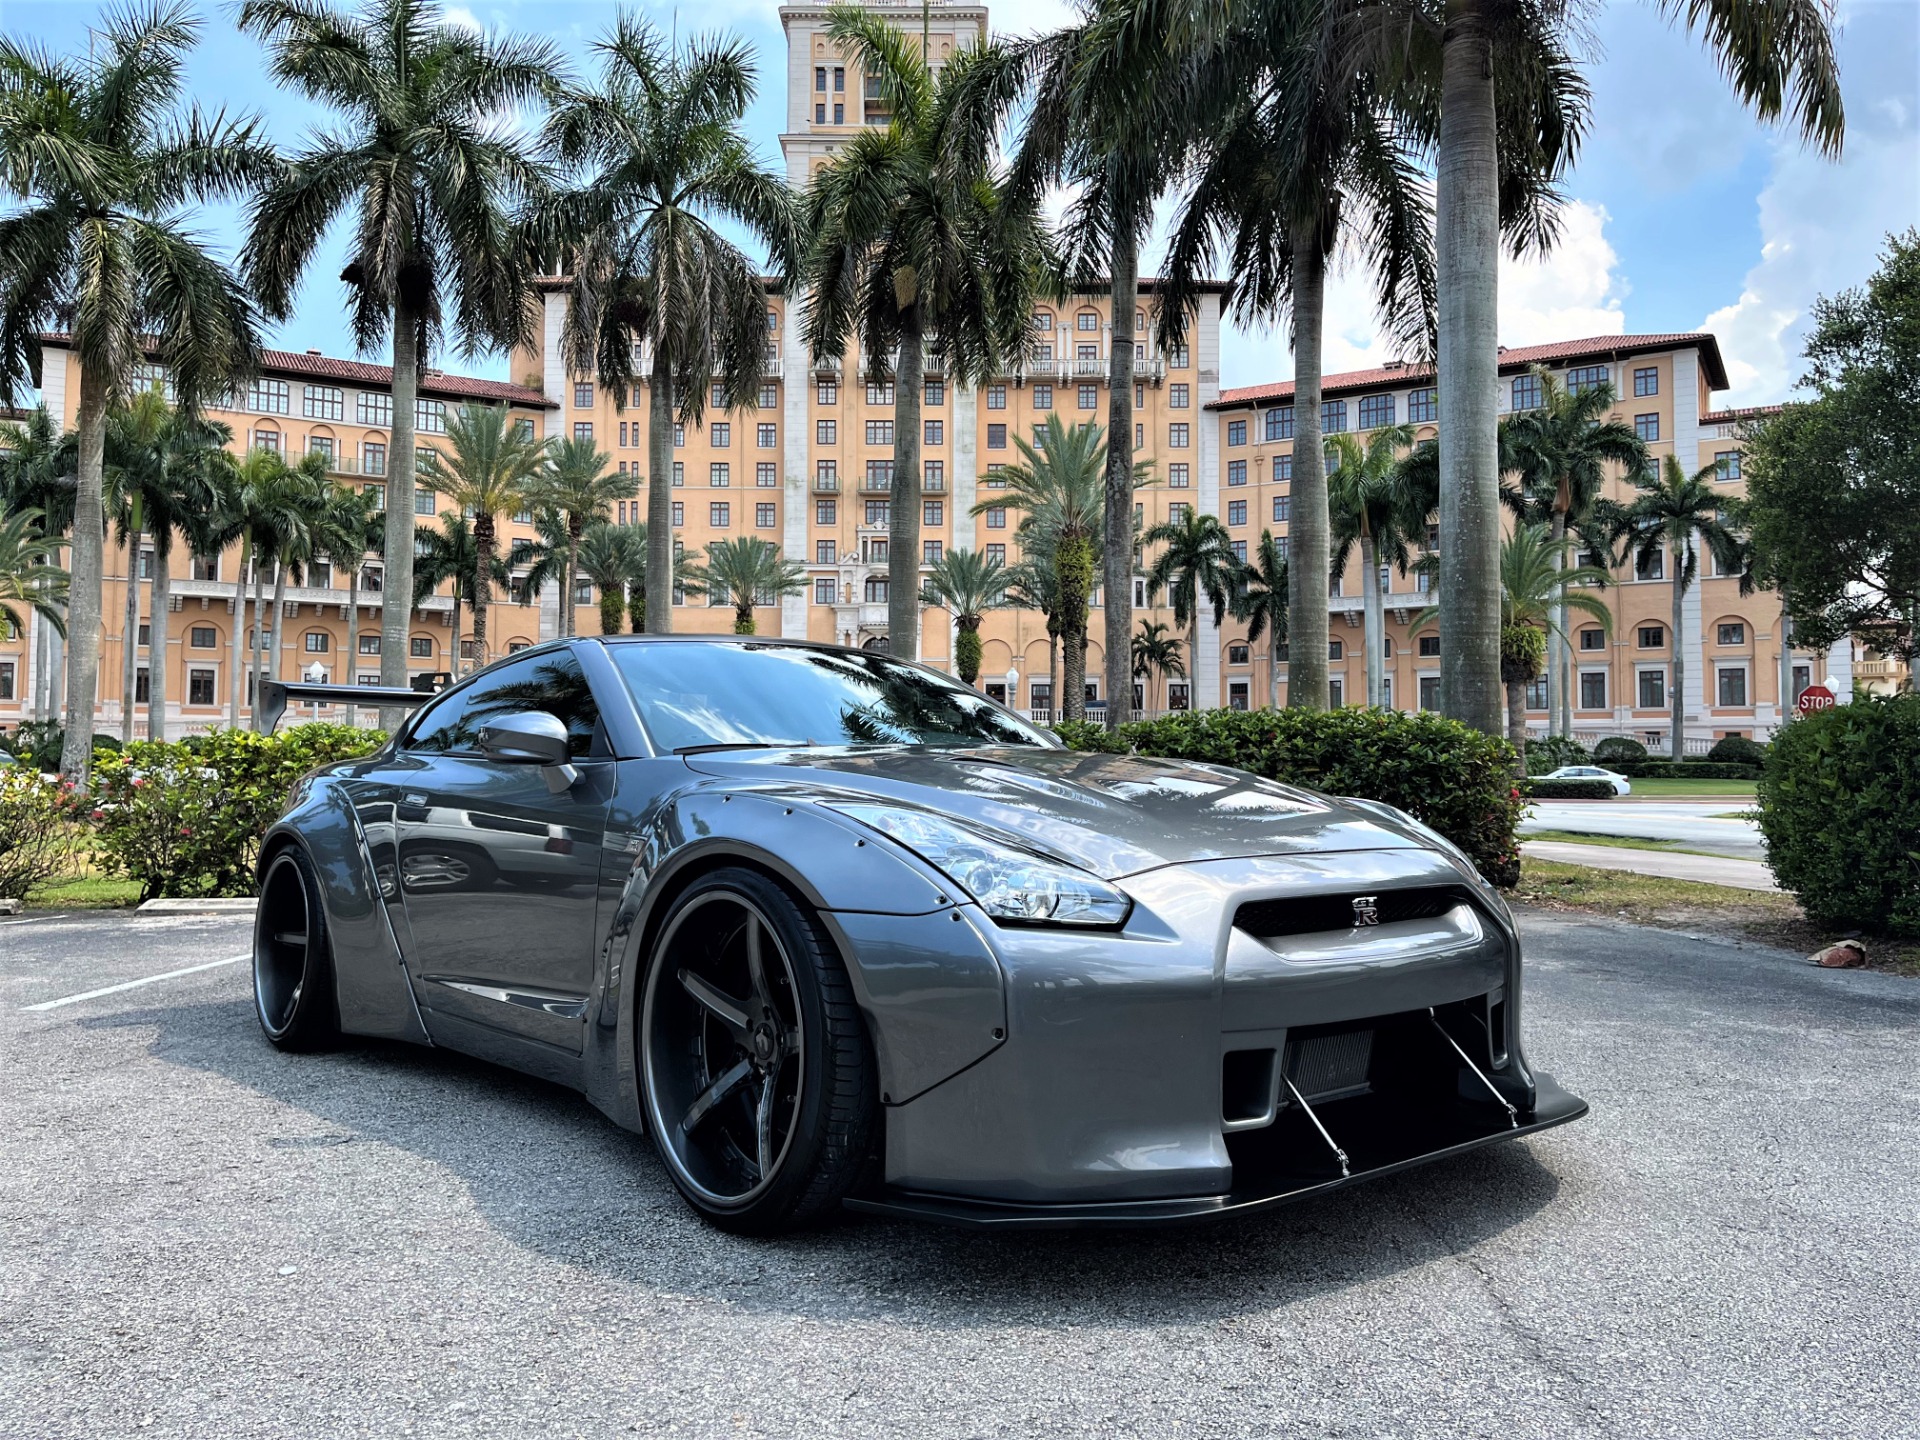 Used 2014 Nissan GT-R Track Edition for sale $144,850 at The Gables Sports Cars in Miami FL 33146 2